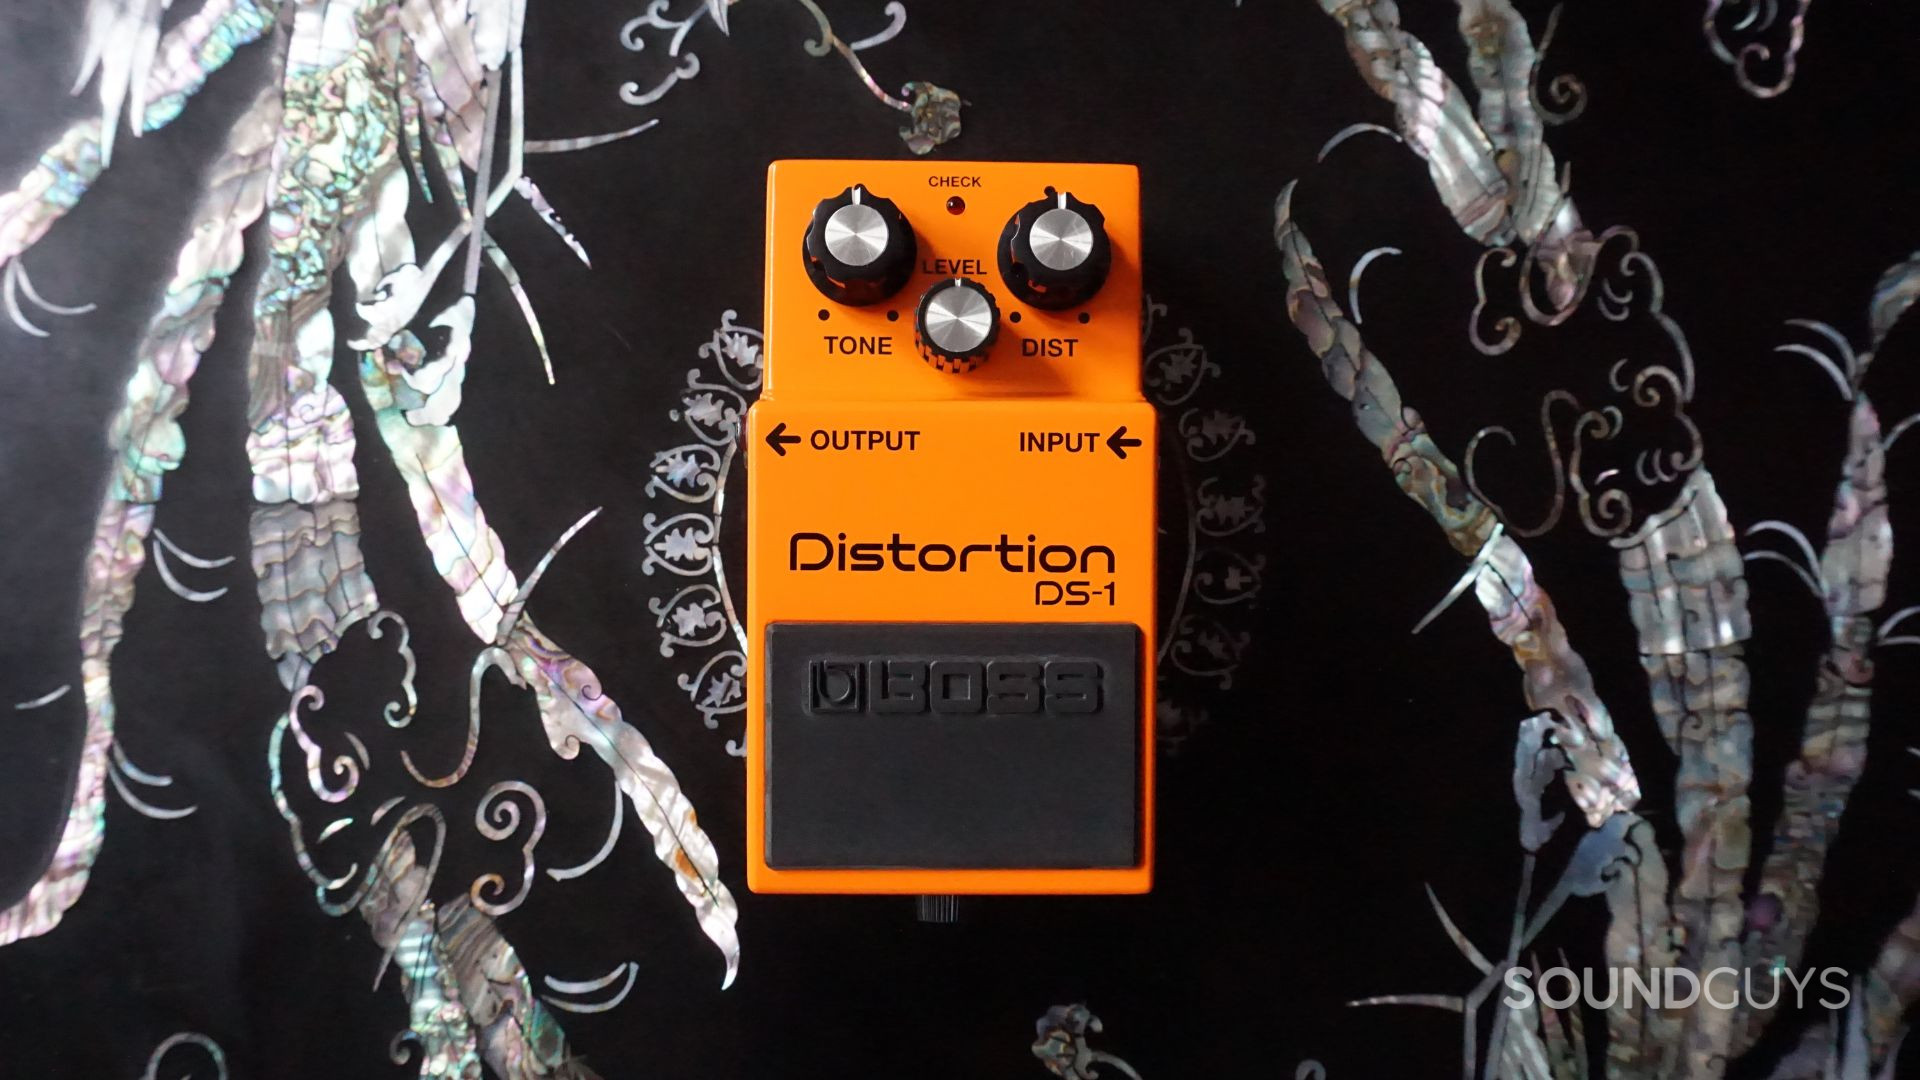 The BOSS DS-1 is a simple-to-use digital effect distortion pedal